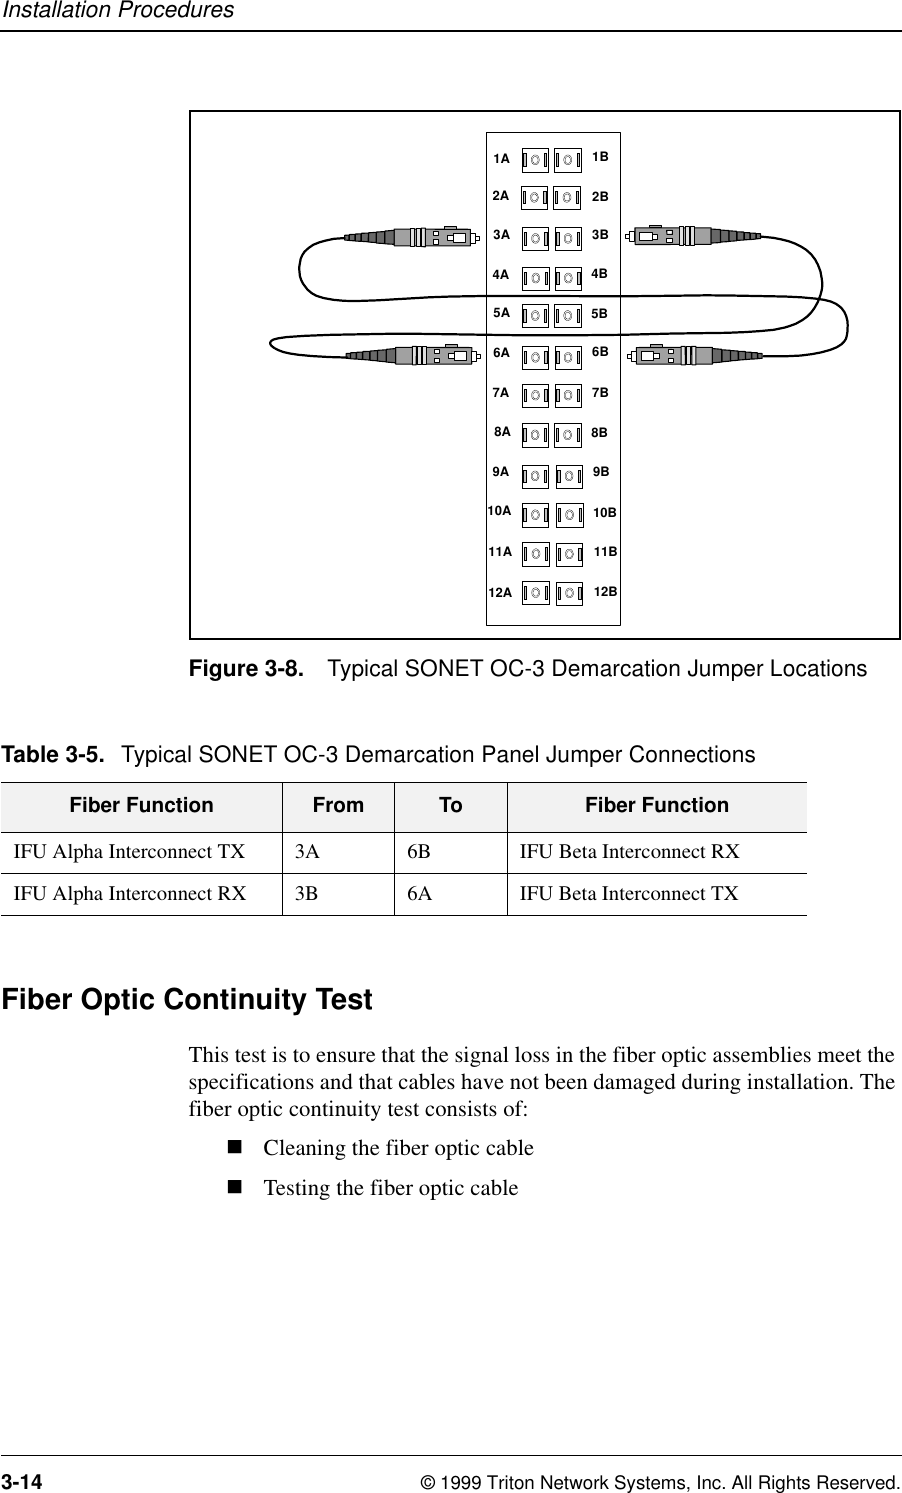 Installation Procedures3-14 © 1999 Triton Network Systems, Inc. All Rights Reserved.Figure 3-8. Typical SONET OC-3 Demarcation Jumper LocationsFiber Optic Continuity TestThis test is to ensure that the signal loss in the fiber optic assemblies meet the specifications and that cables have not been damaged during installation. The fiber optic continuity test consists of:nCleaning the fiber optic cablenTesting the fiber optic cable1A 1B2A 2B3A 3B4A5A4B5B6A 6B7A 7B8A9B8B9A10A 10B11A 11B12A 12BTable 3-5. Typical SONET OC-3 Demarcation Panel Jumper ConnectionsFiber Function From To Fiber FunctionIFU Alpha Interconnect TX 3A 6B IFU Beta Interconnect RXIFU Alpha Interconnect RX 3B 6A IFU Beta Interconnect TX